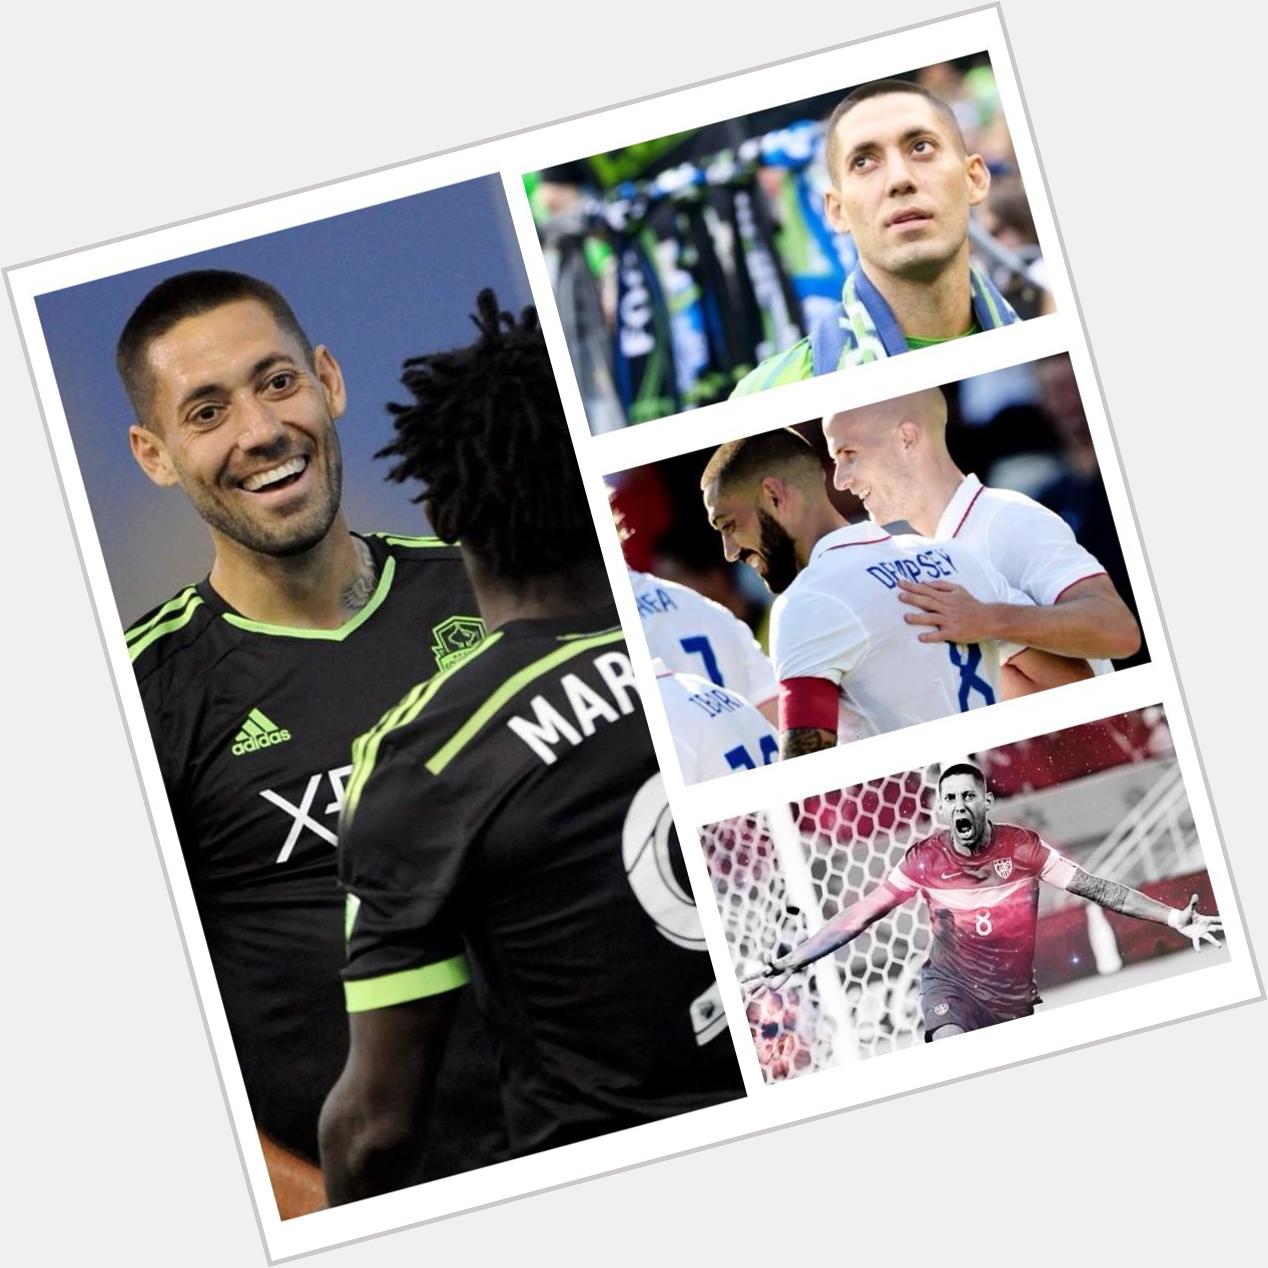 A happy birthday to our Sounders man and Captain America!  